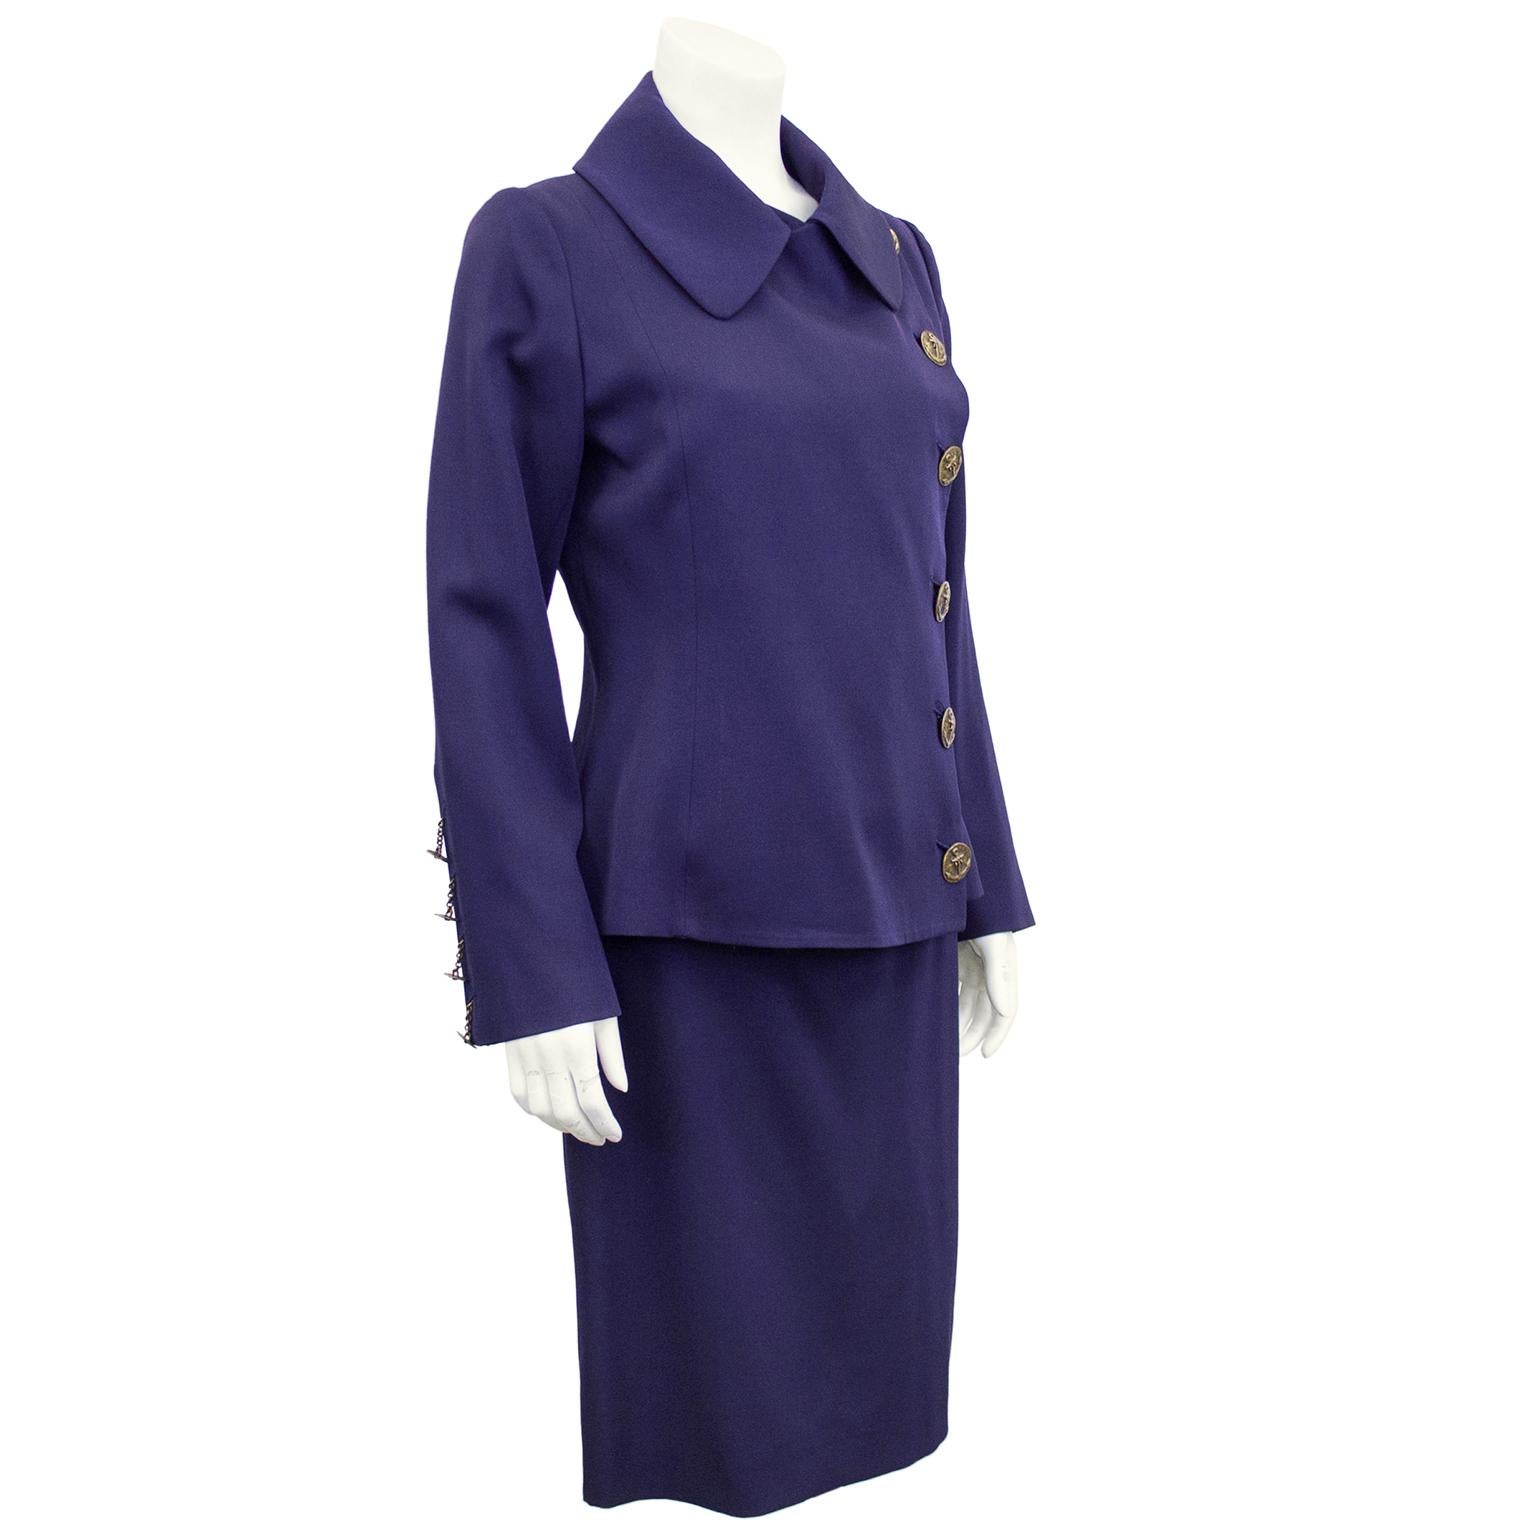 1990s Jean Paul Gaultier Femme deep dusty purple skirt suit. Jacket features an exaggerated rounded edge shirt  collar and six large distressed brass buttons with anchor and chain details hanging through brass grommets. Four smaller matching buttons